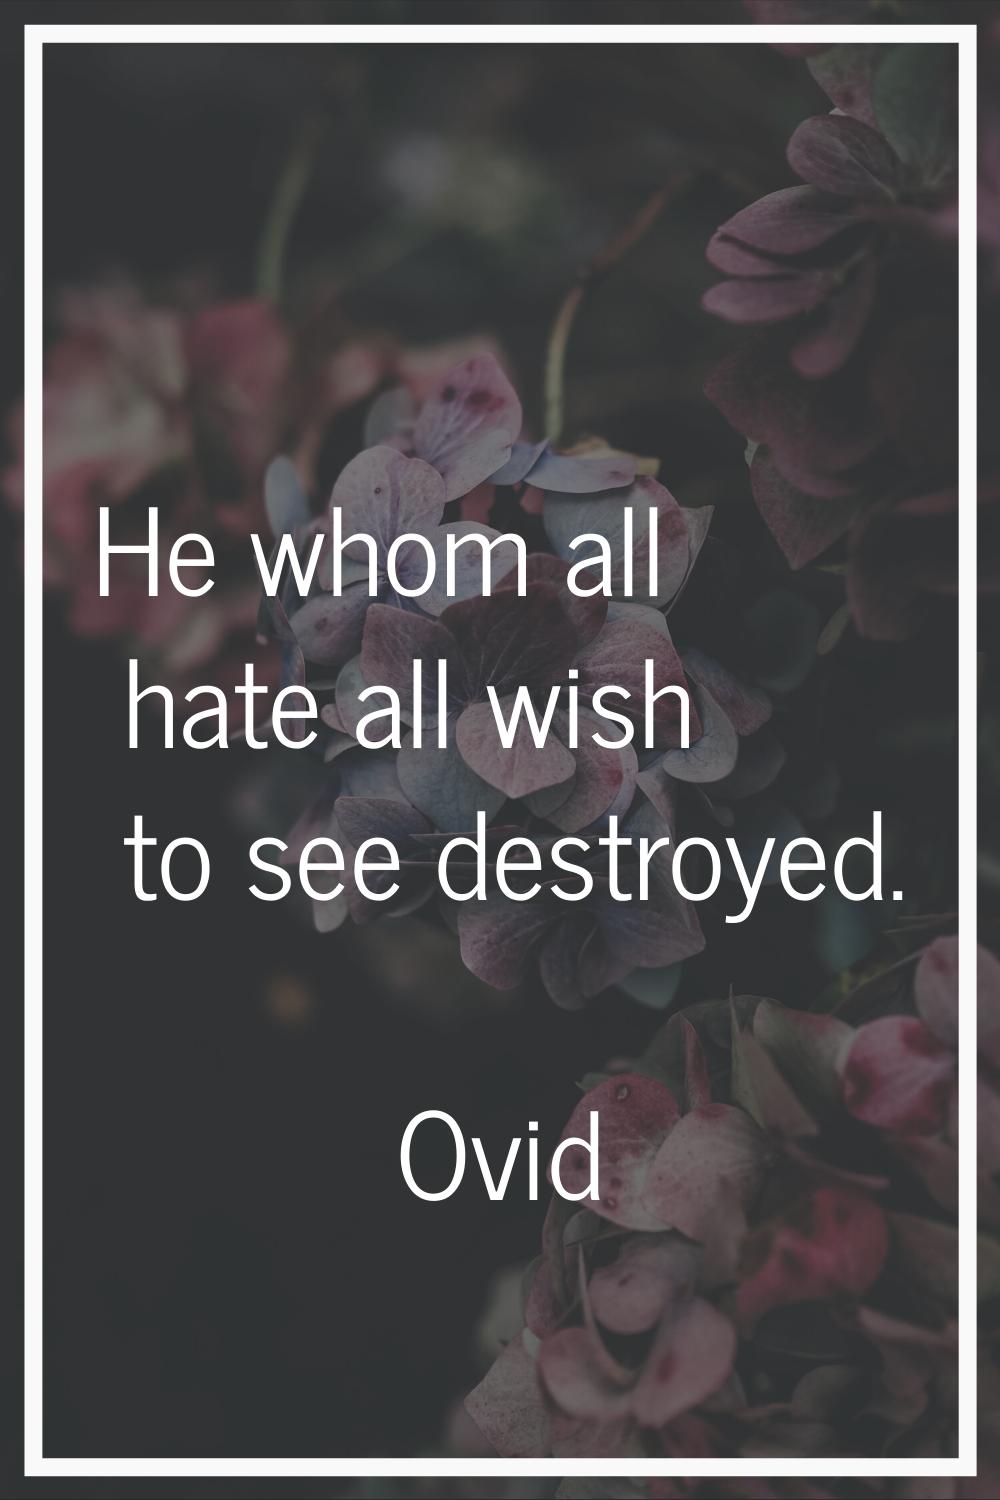 He whom all hate all wish to see destroyed.